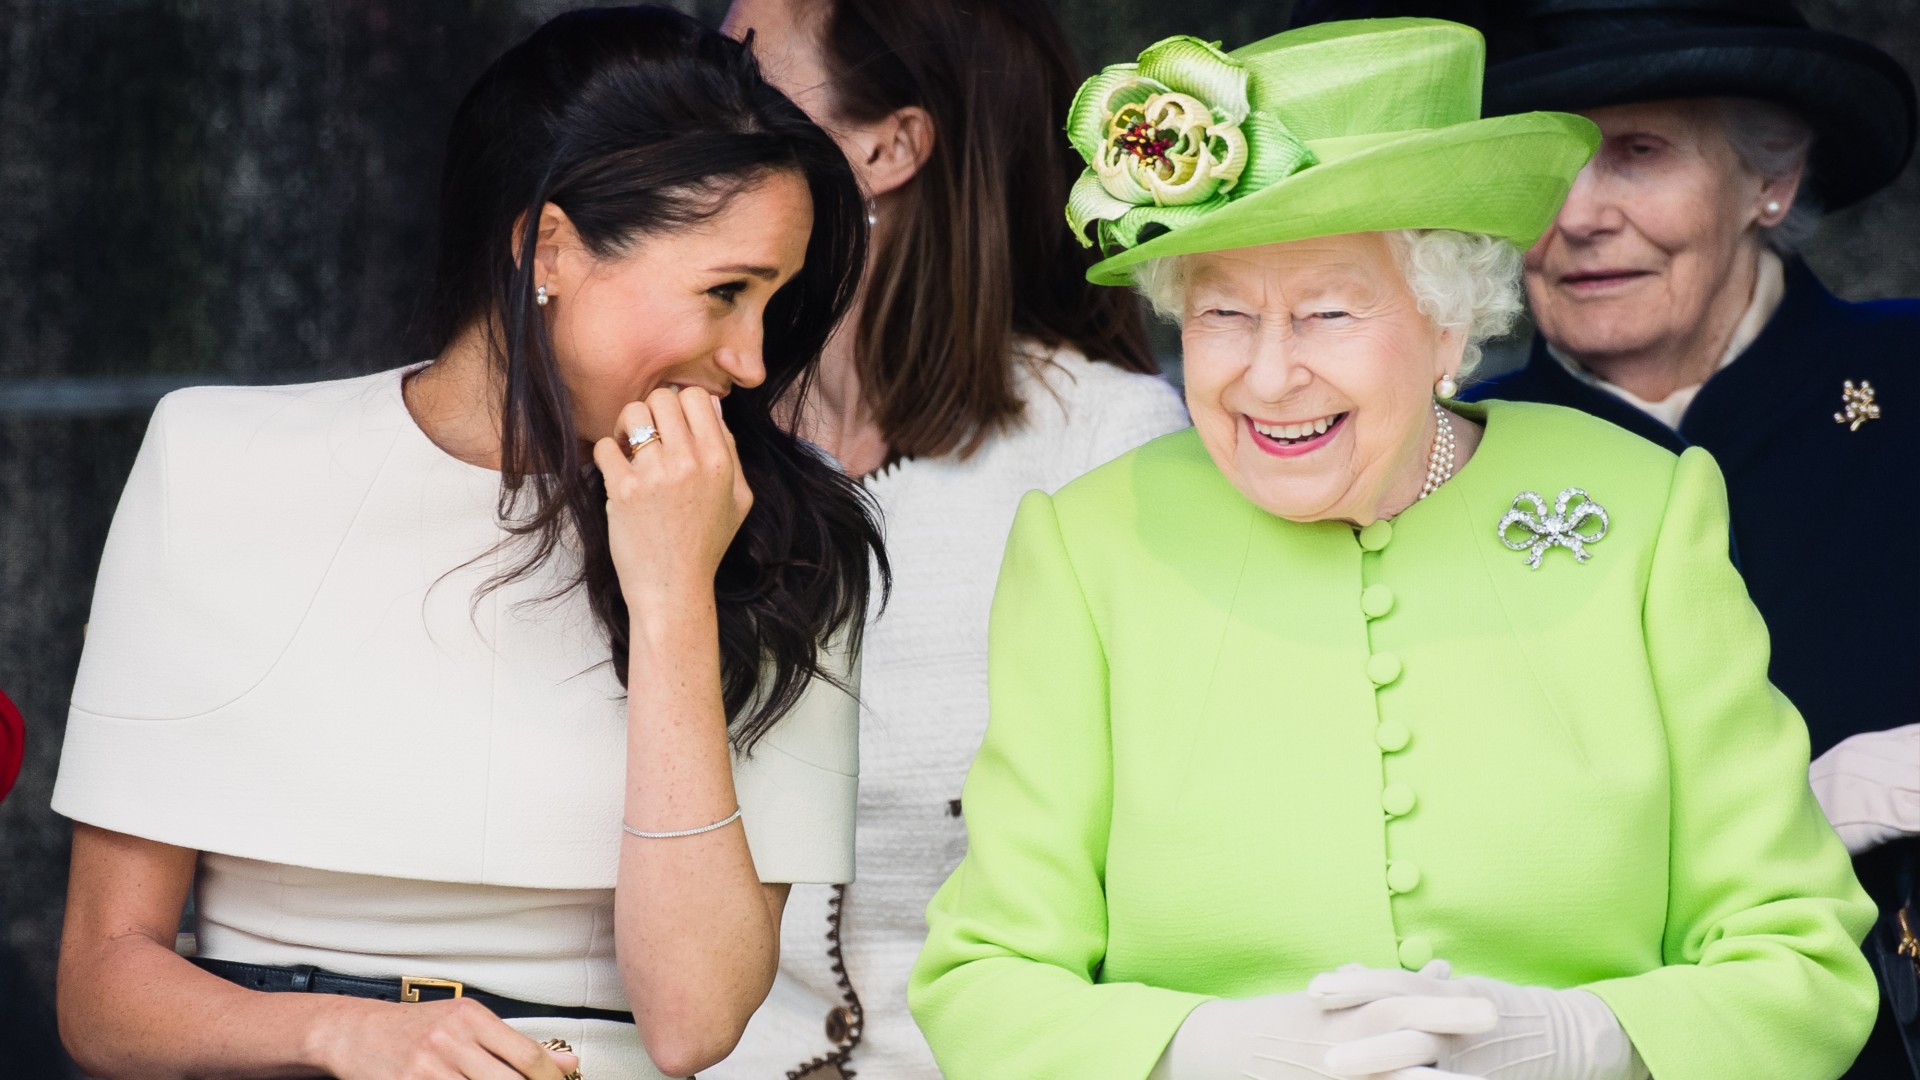 The Queen Worried Prince Harry Was “Too Much in Love” with Meghan Markle, New Book Claims